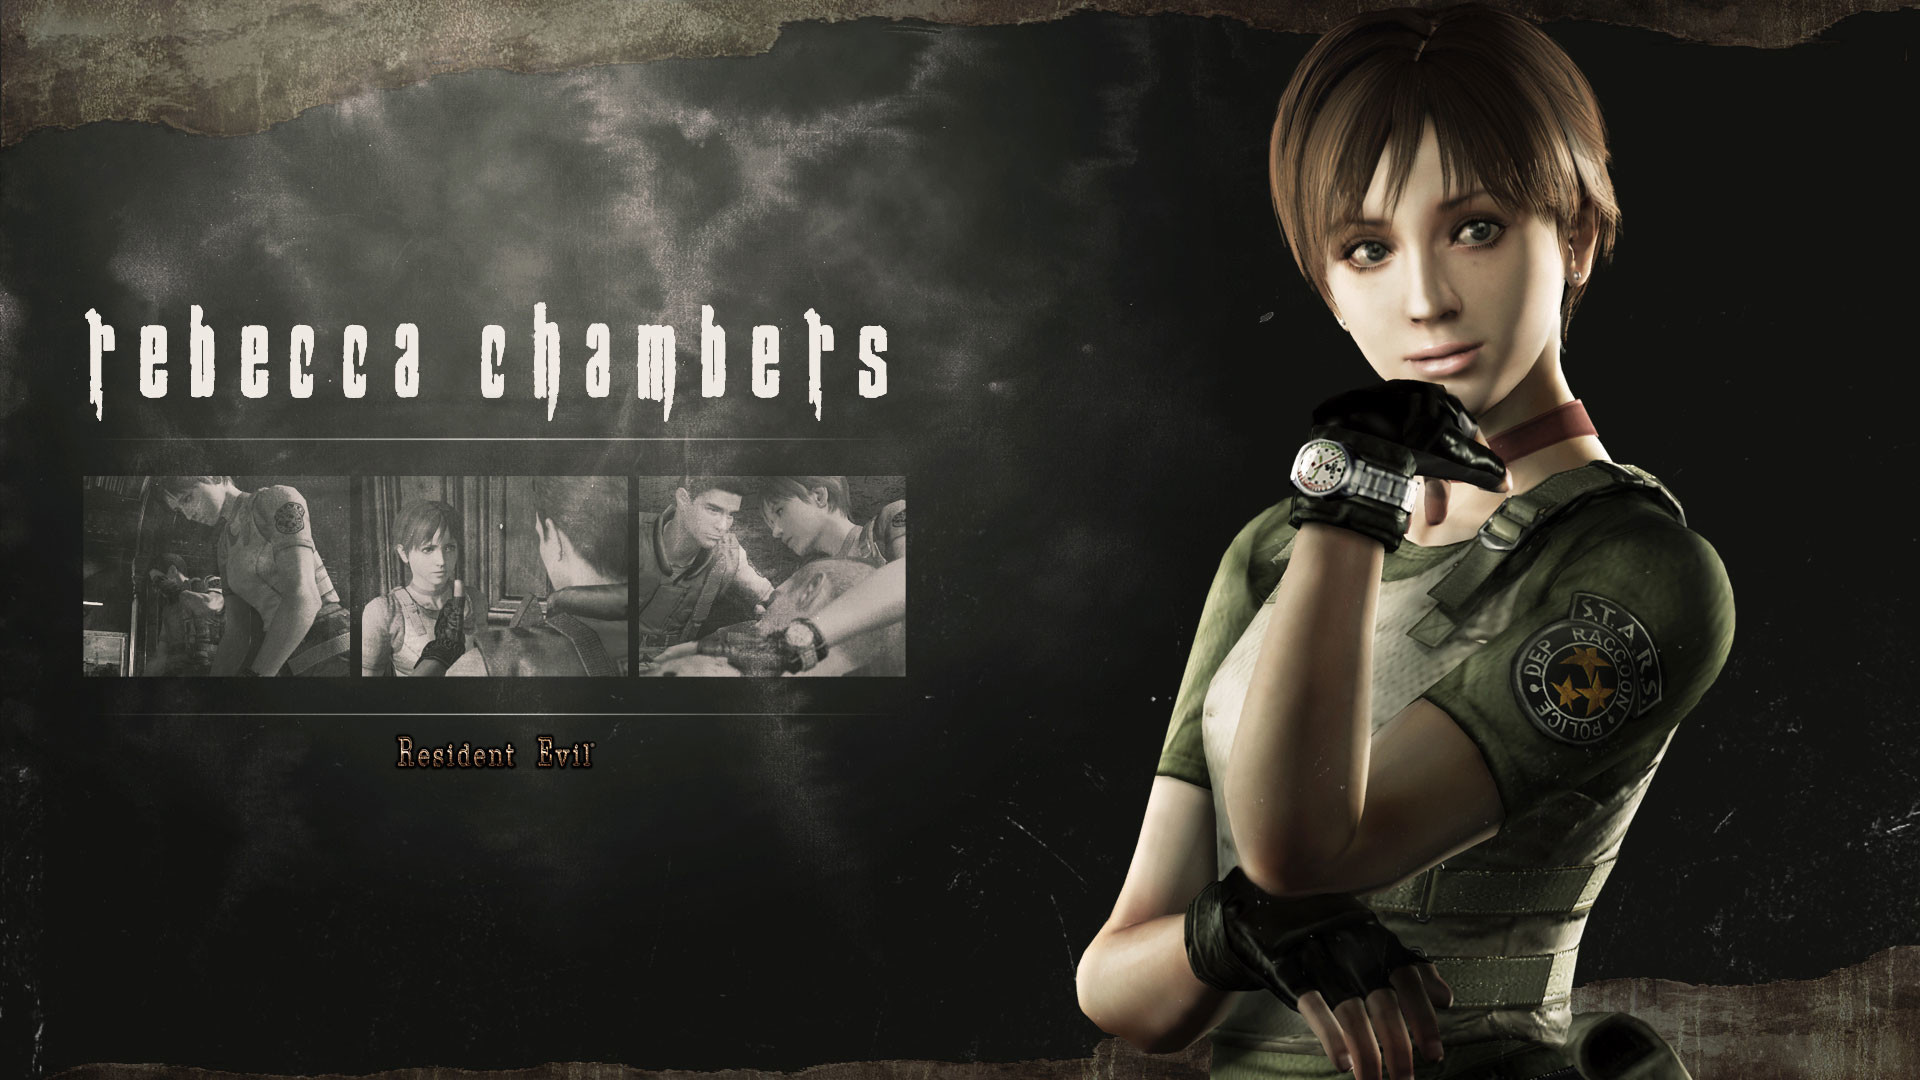 1920x1080 Resident Evil / biohazard HD REMASTER - Rebecca Chambers | Steam Trading  Cards Wiki | FANDOM powered by Wikia